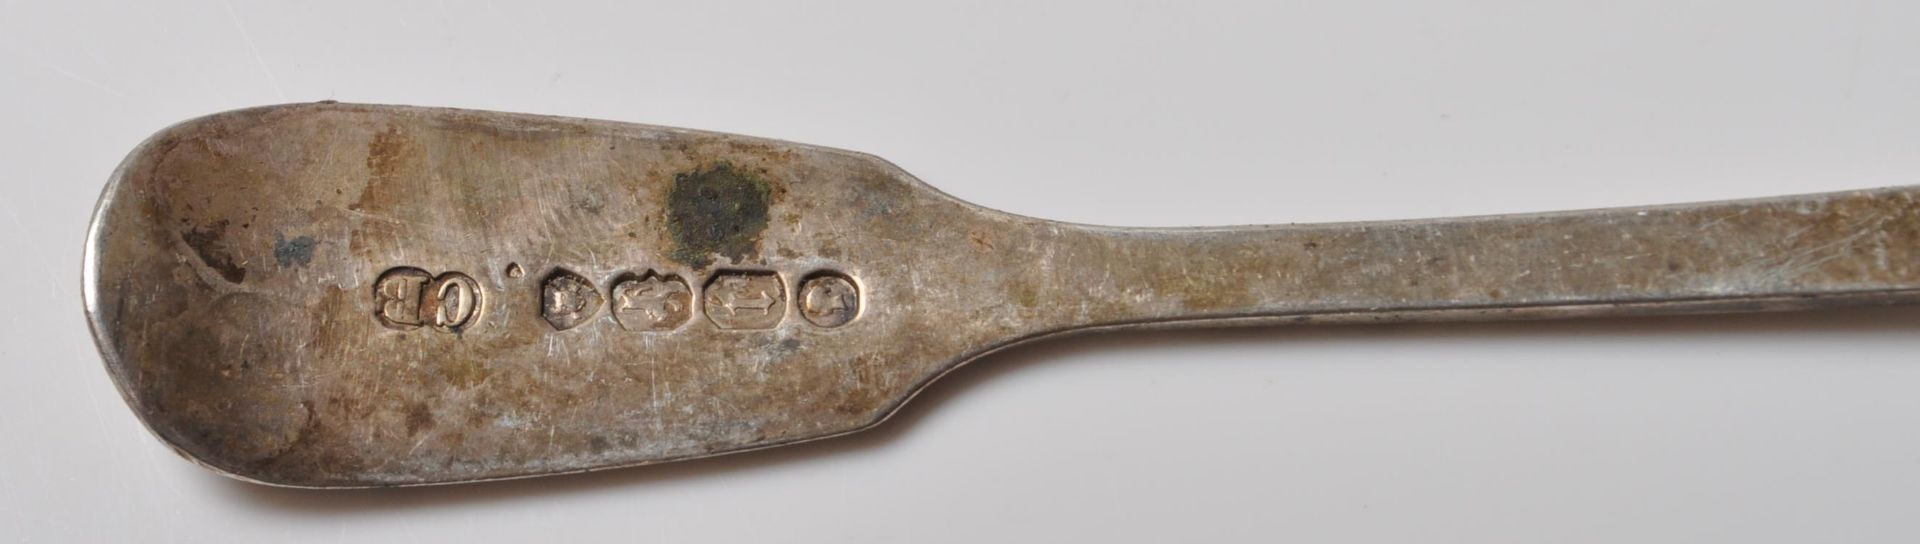 GROUP OF SILVER HALLMARKED HARLEQUIN SPOONS - Image 6 of 8